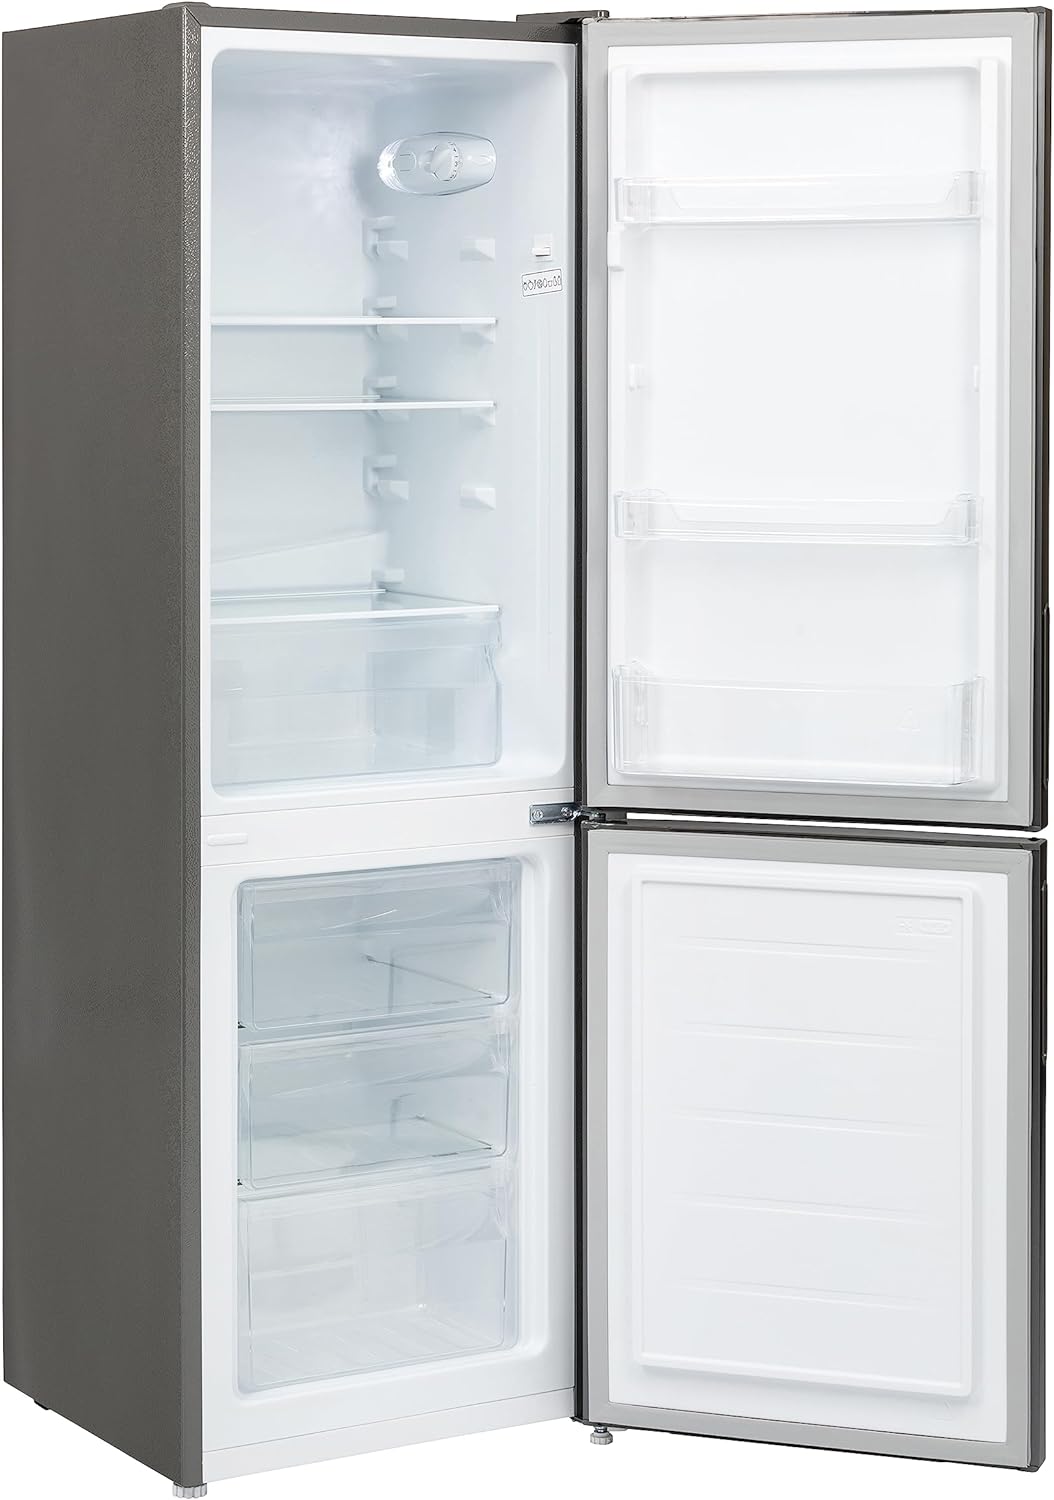 Willow WFF157G 157L Freestanding 70/30 Fridge Freezer with Adjustable Thermostat, Mark - Proof Finish, Low Frost, 2 Year Warranty - Grey - Amazing Gadgets Outlet